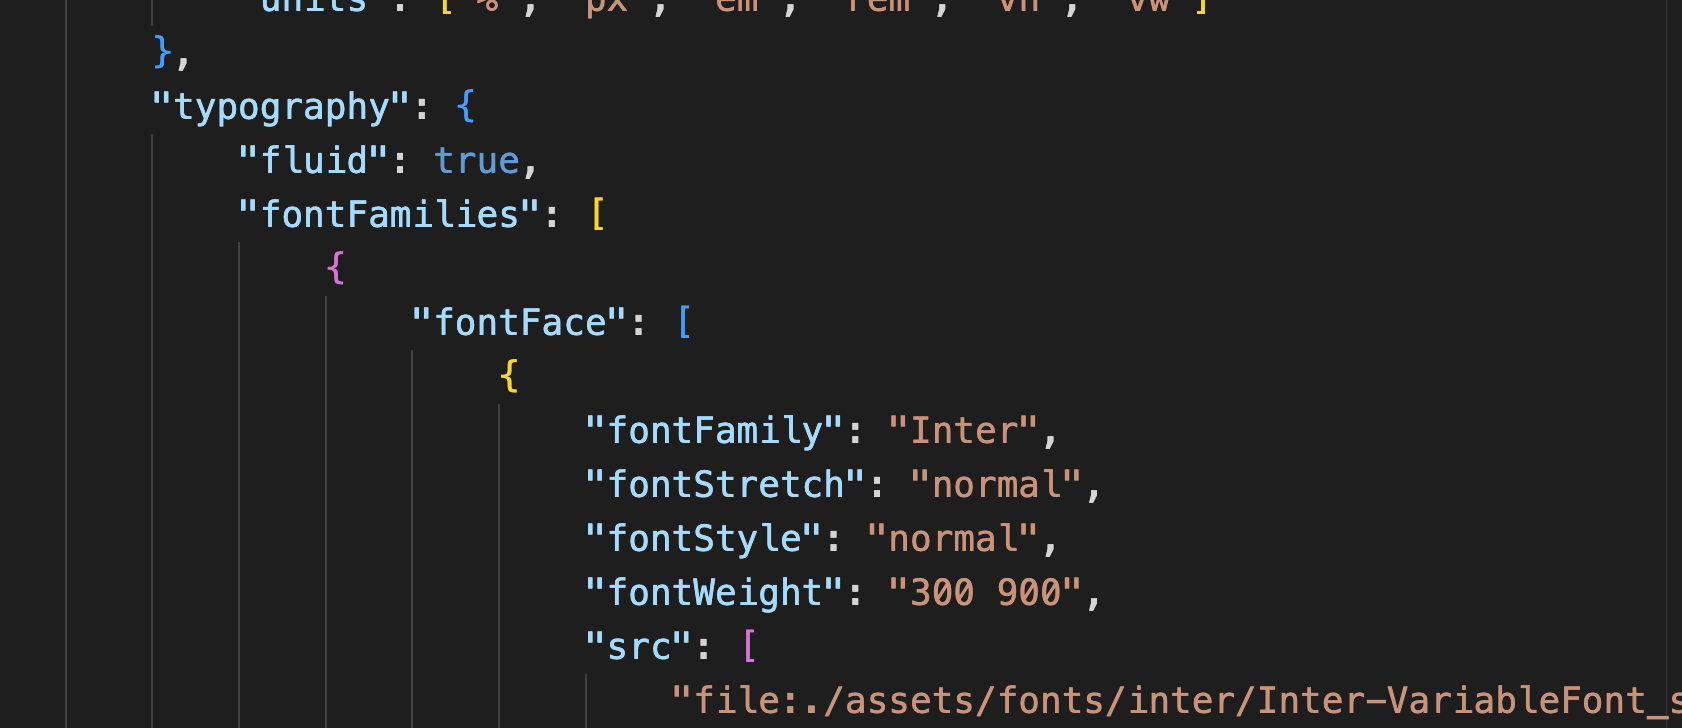 Fonts in theme.json